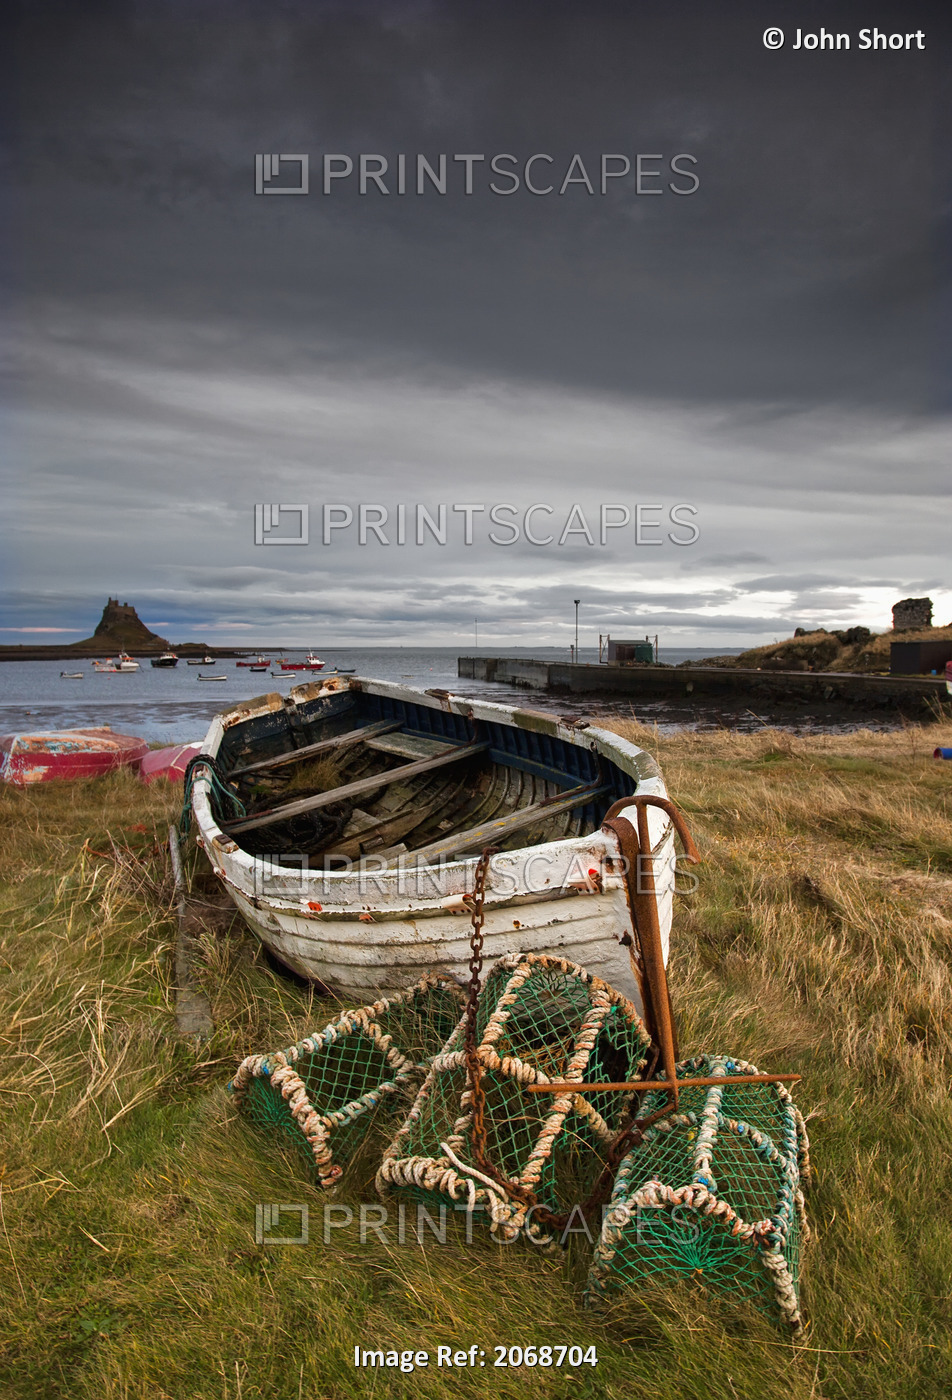 A Weathered Boat And Fishing Equipment Sitting On The Shore With Lindisfarne ...